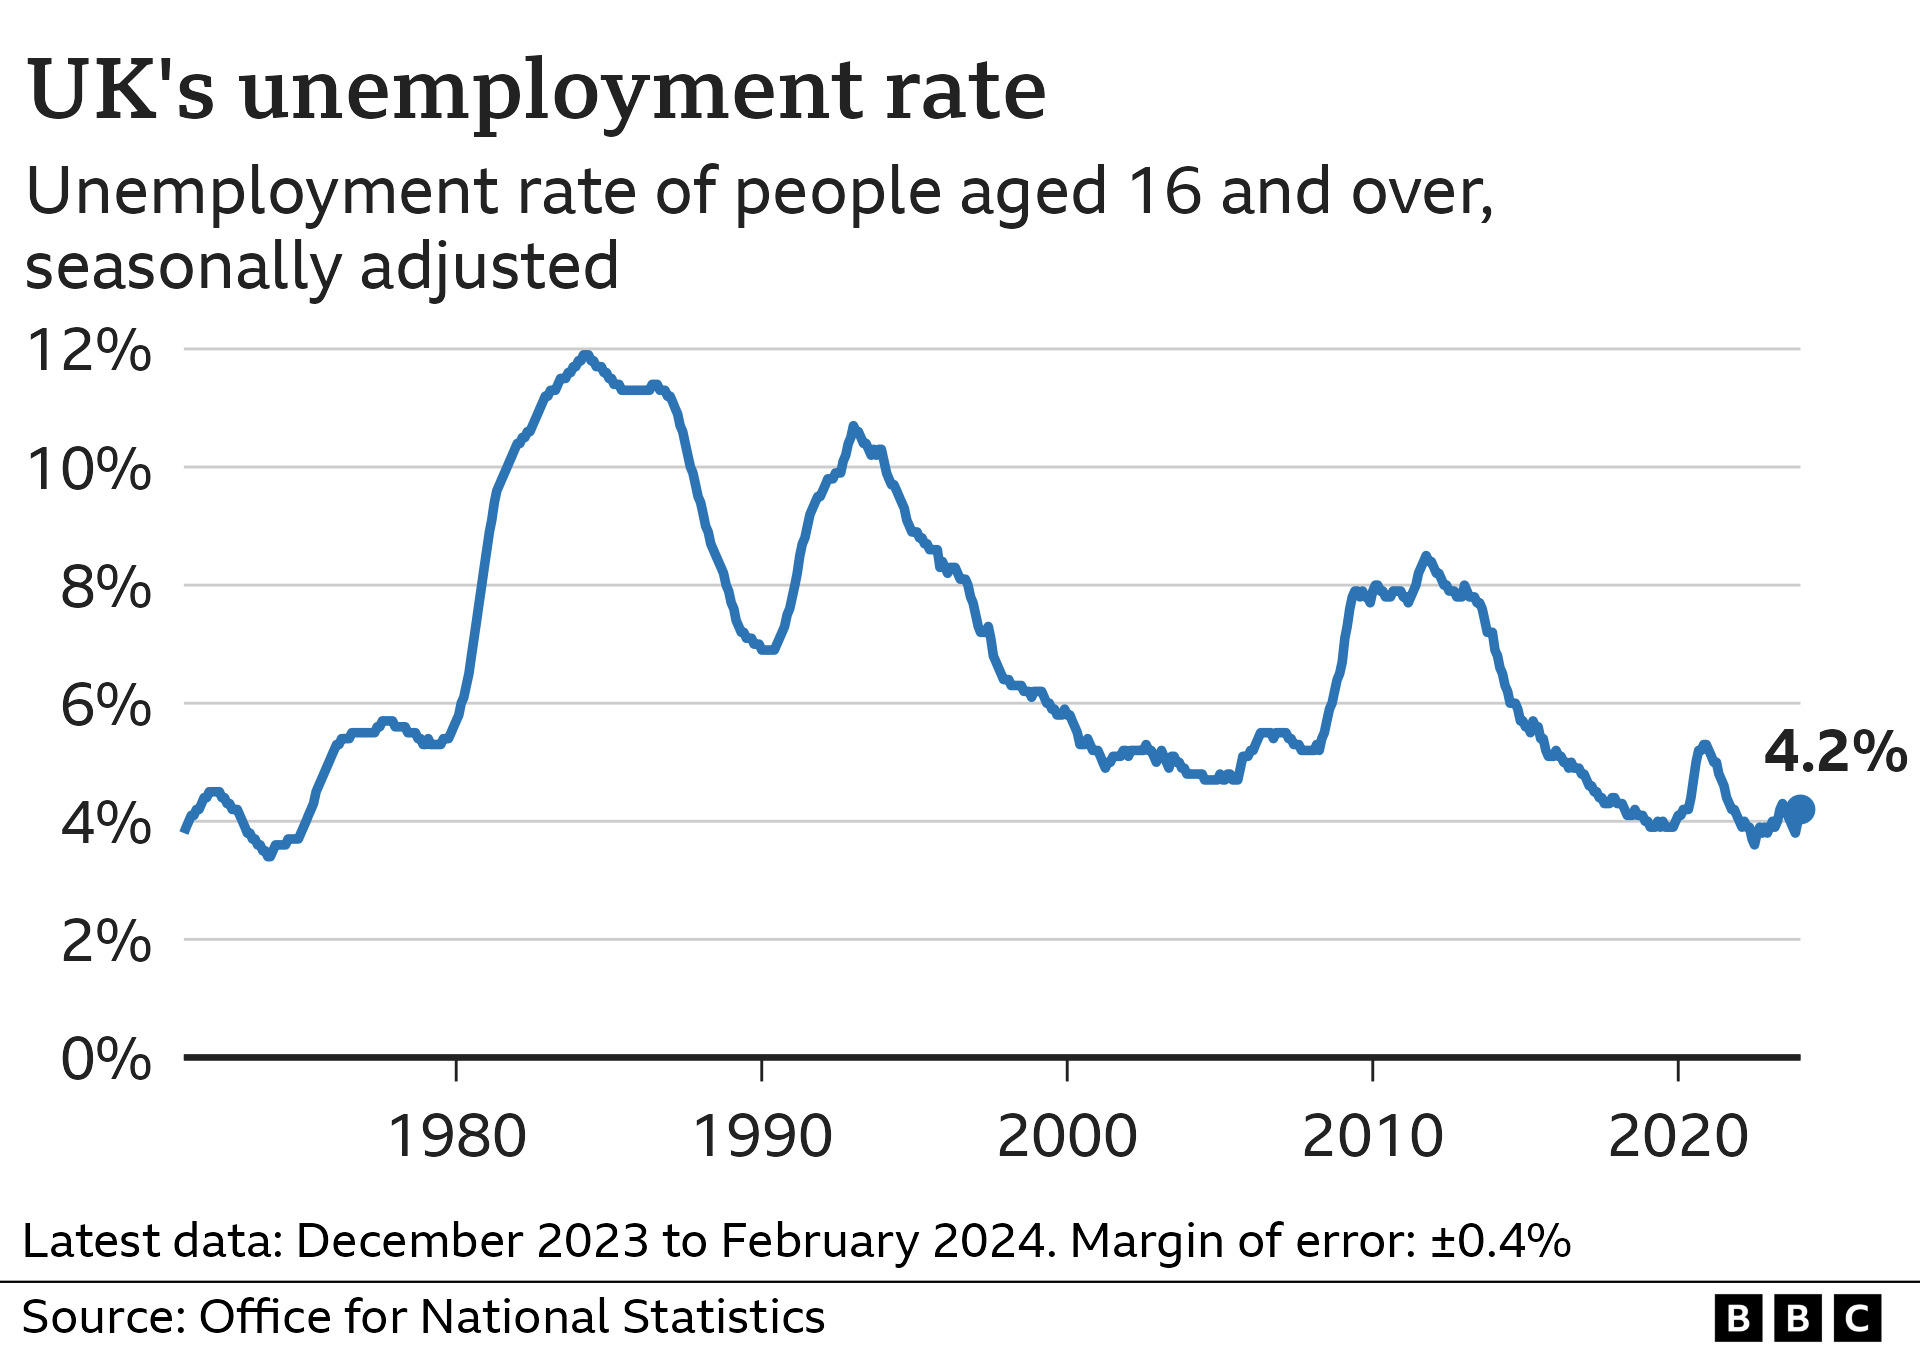 UK unemployment - currently at 4.2% - is relatively low historically, based on data going bact to the 1970s.